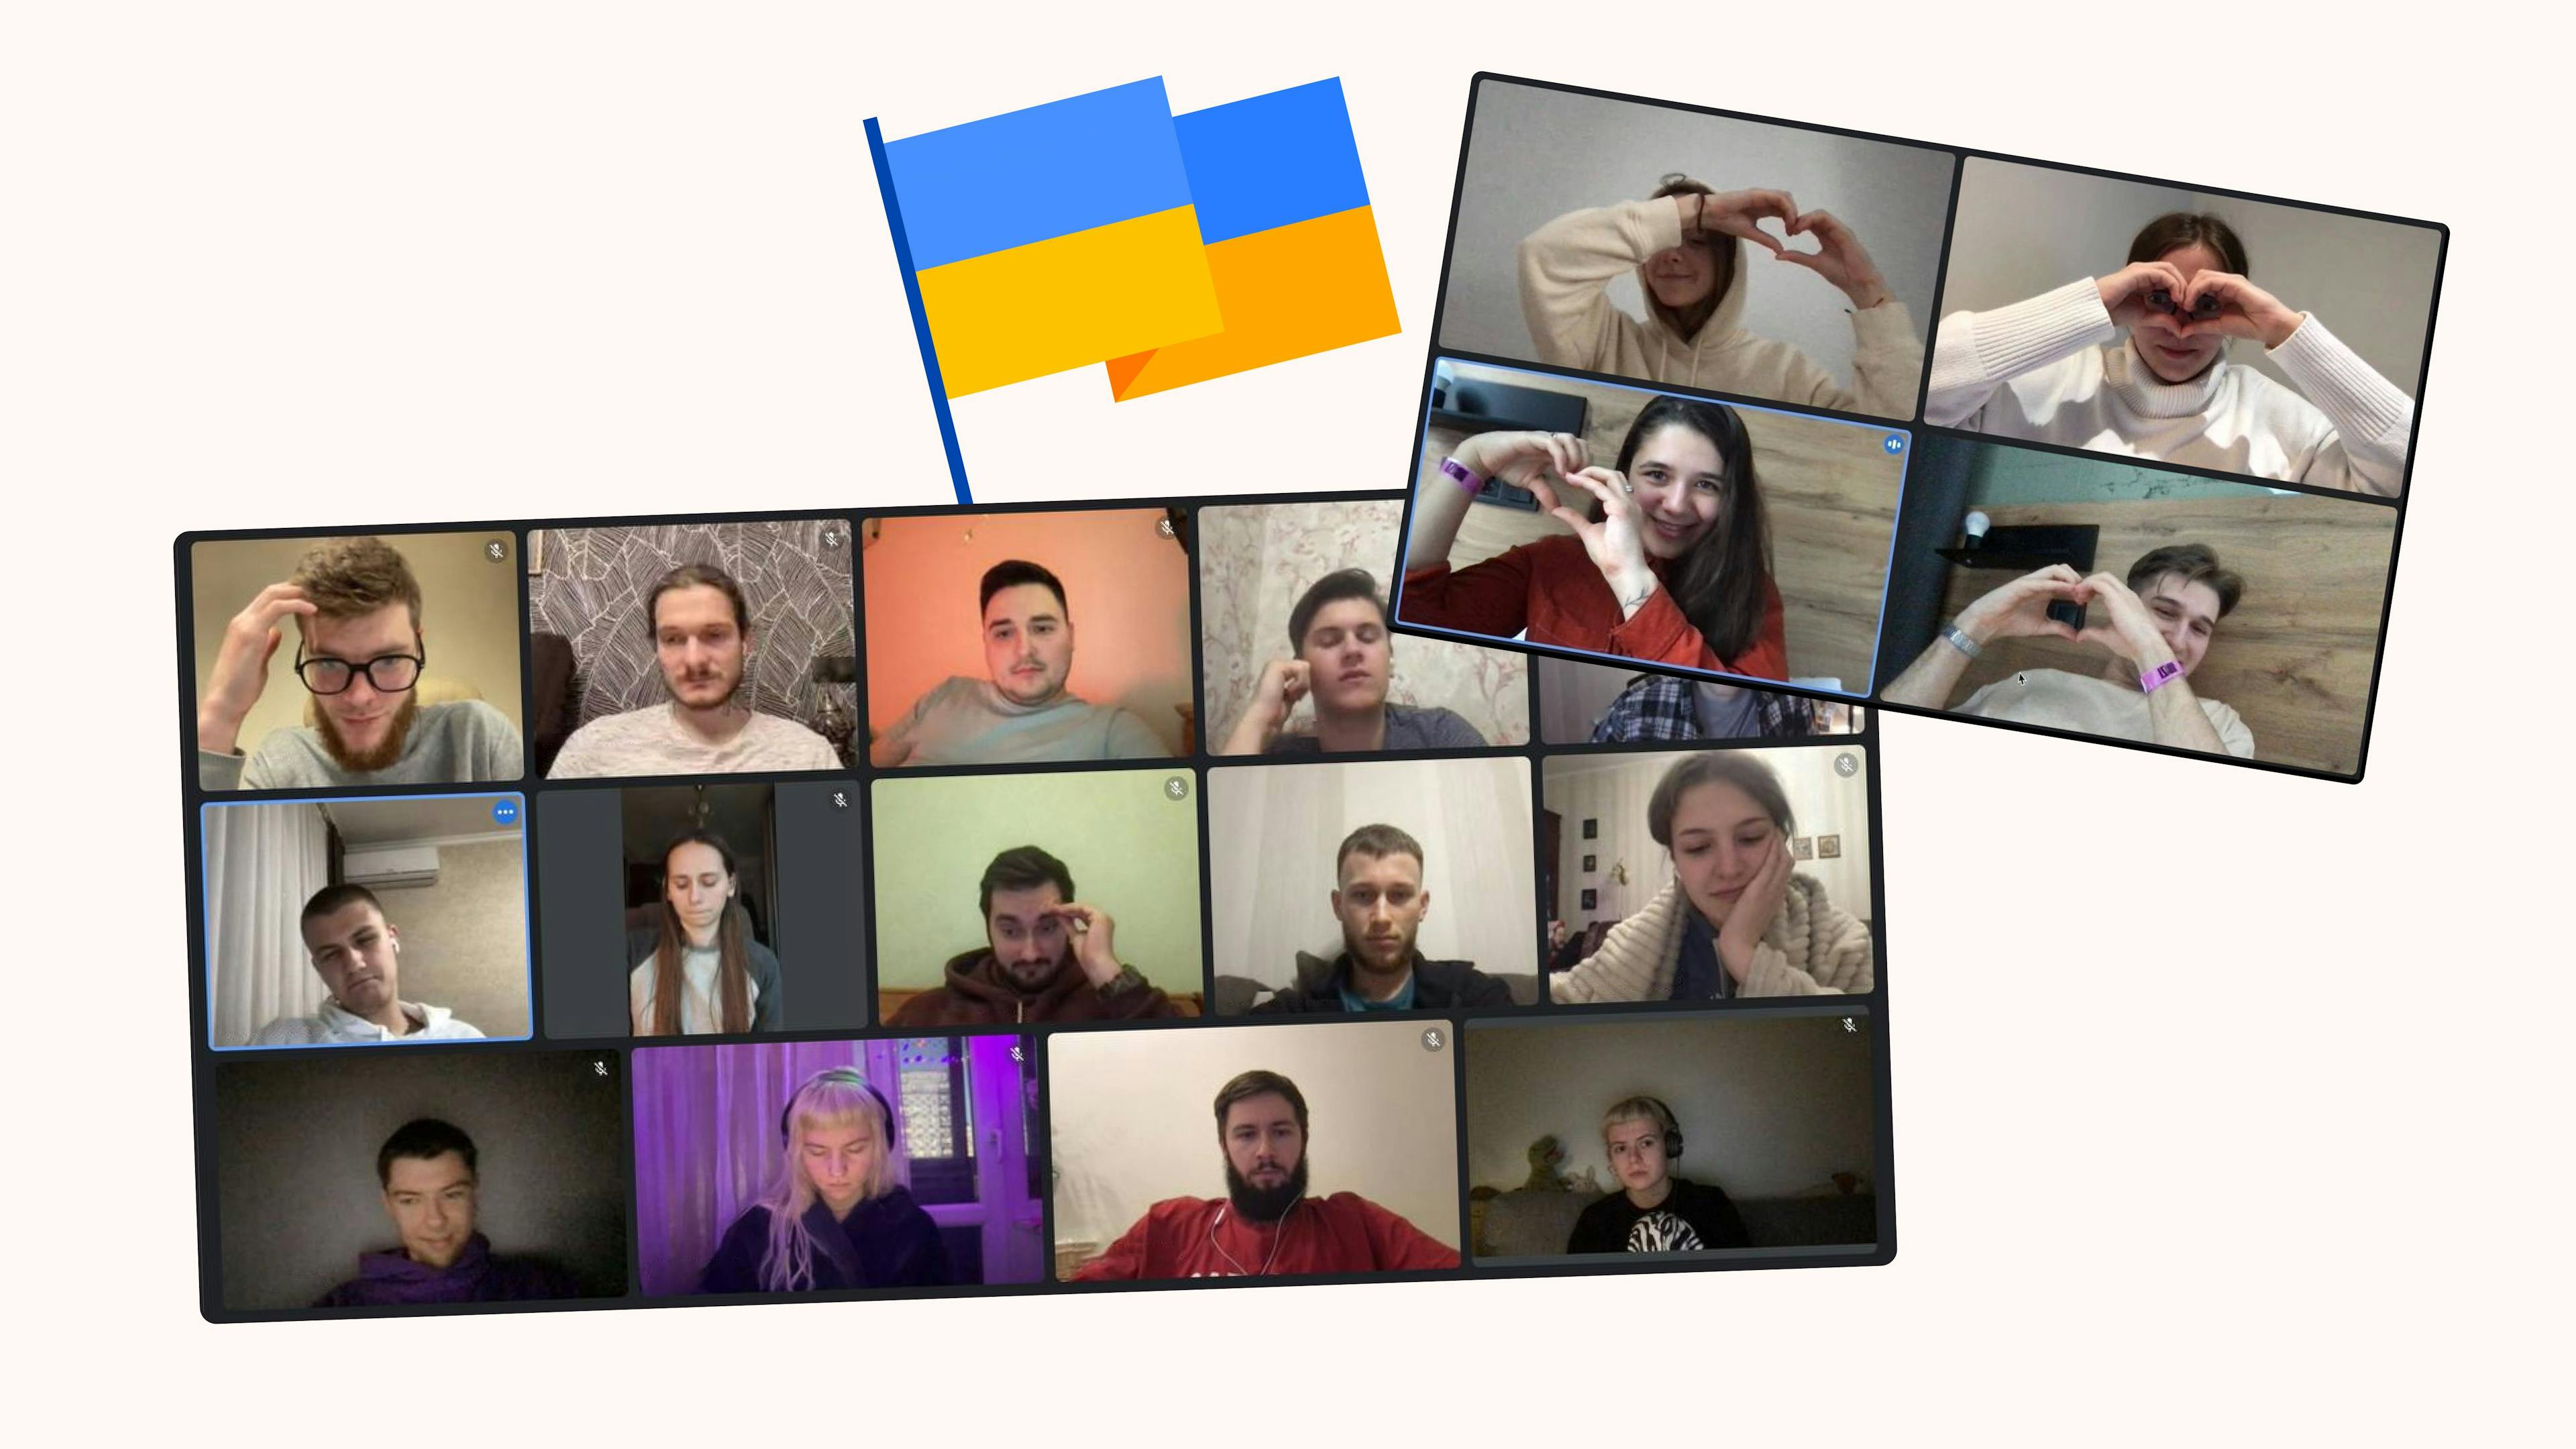 /ukrainian-tech-startups-carry-on-how-we-are-enduring-the-invasion feature image